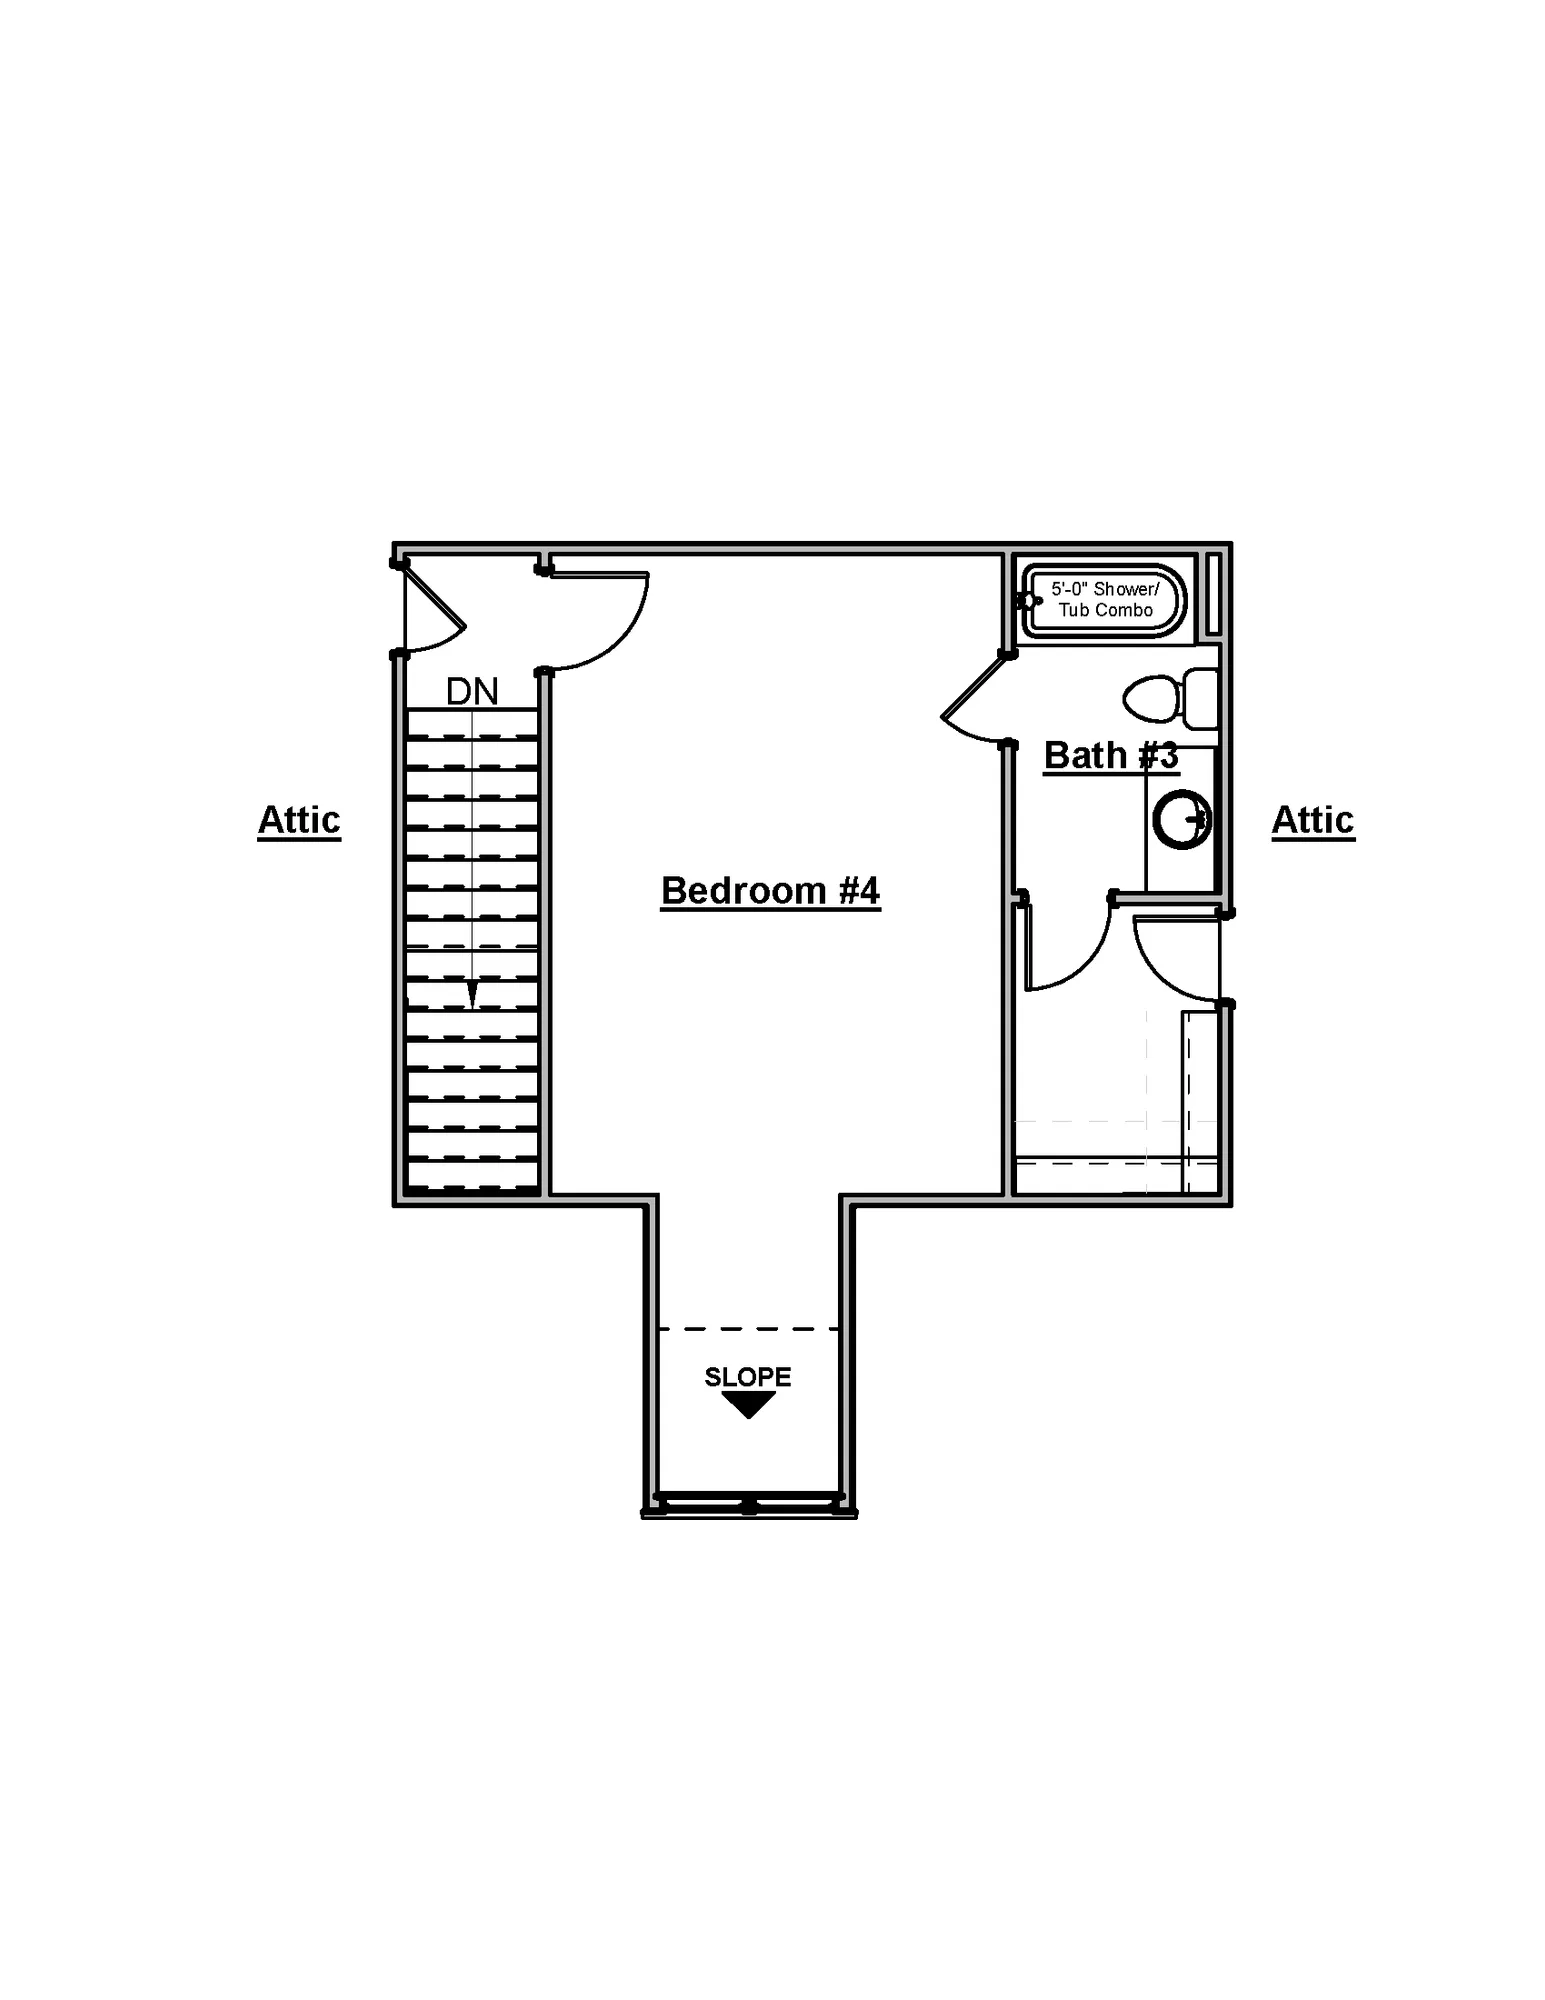 Upstairs 4th Bedroom & Bath Option - undefined